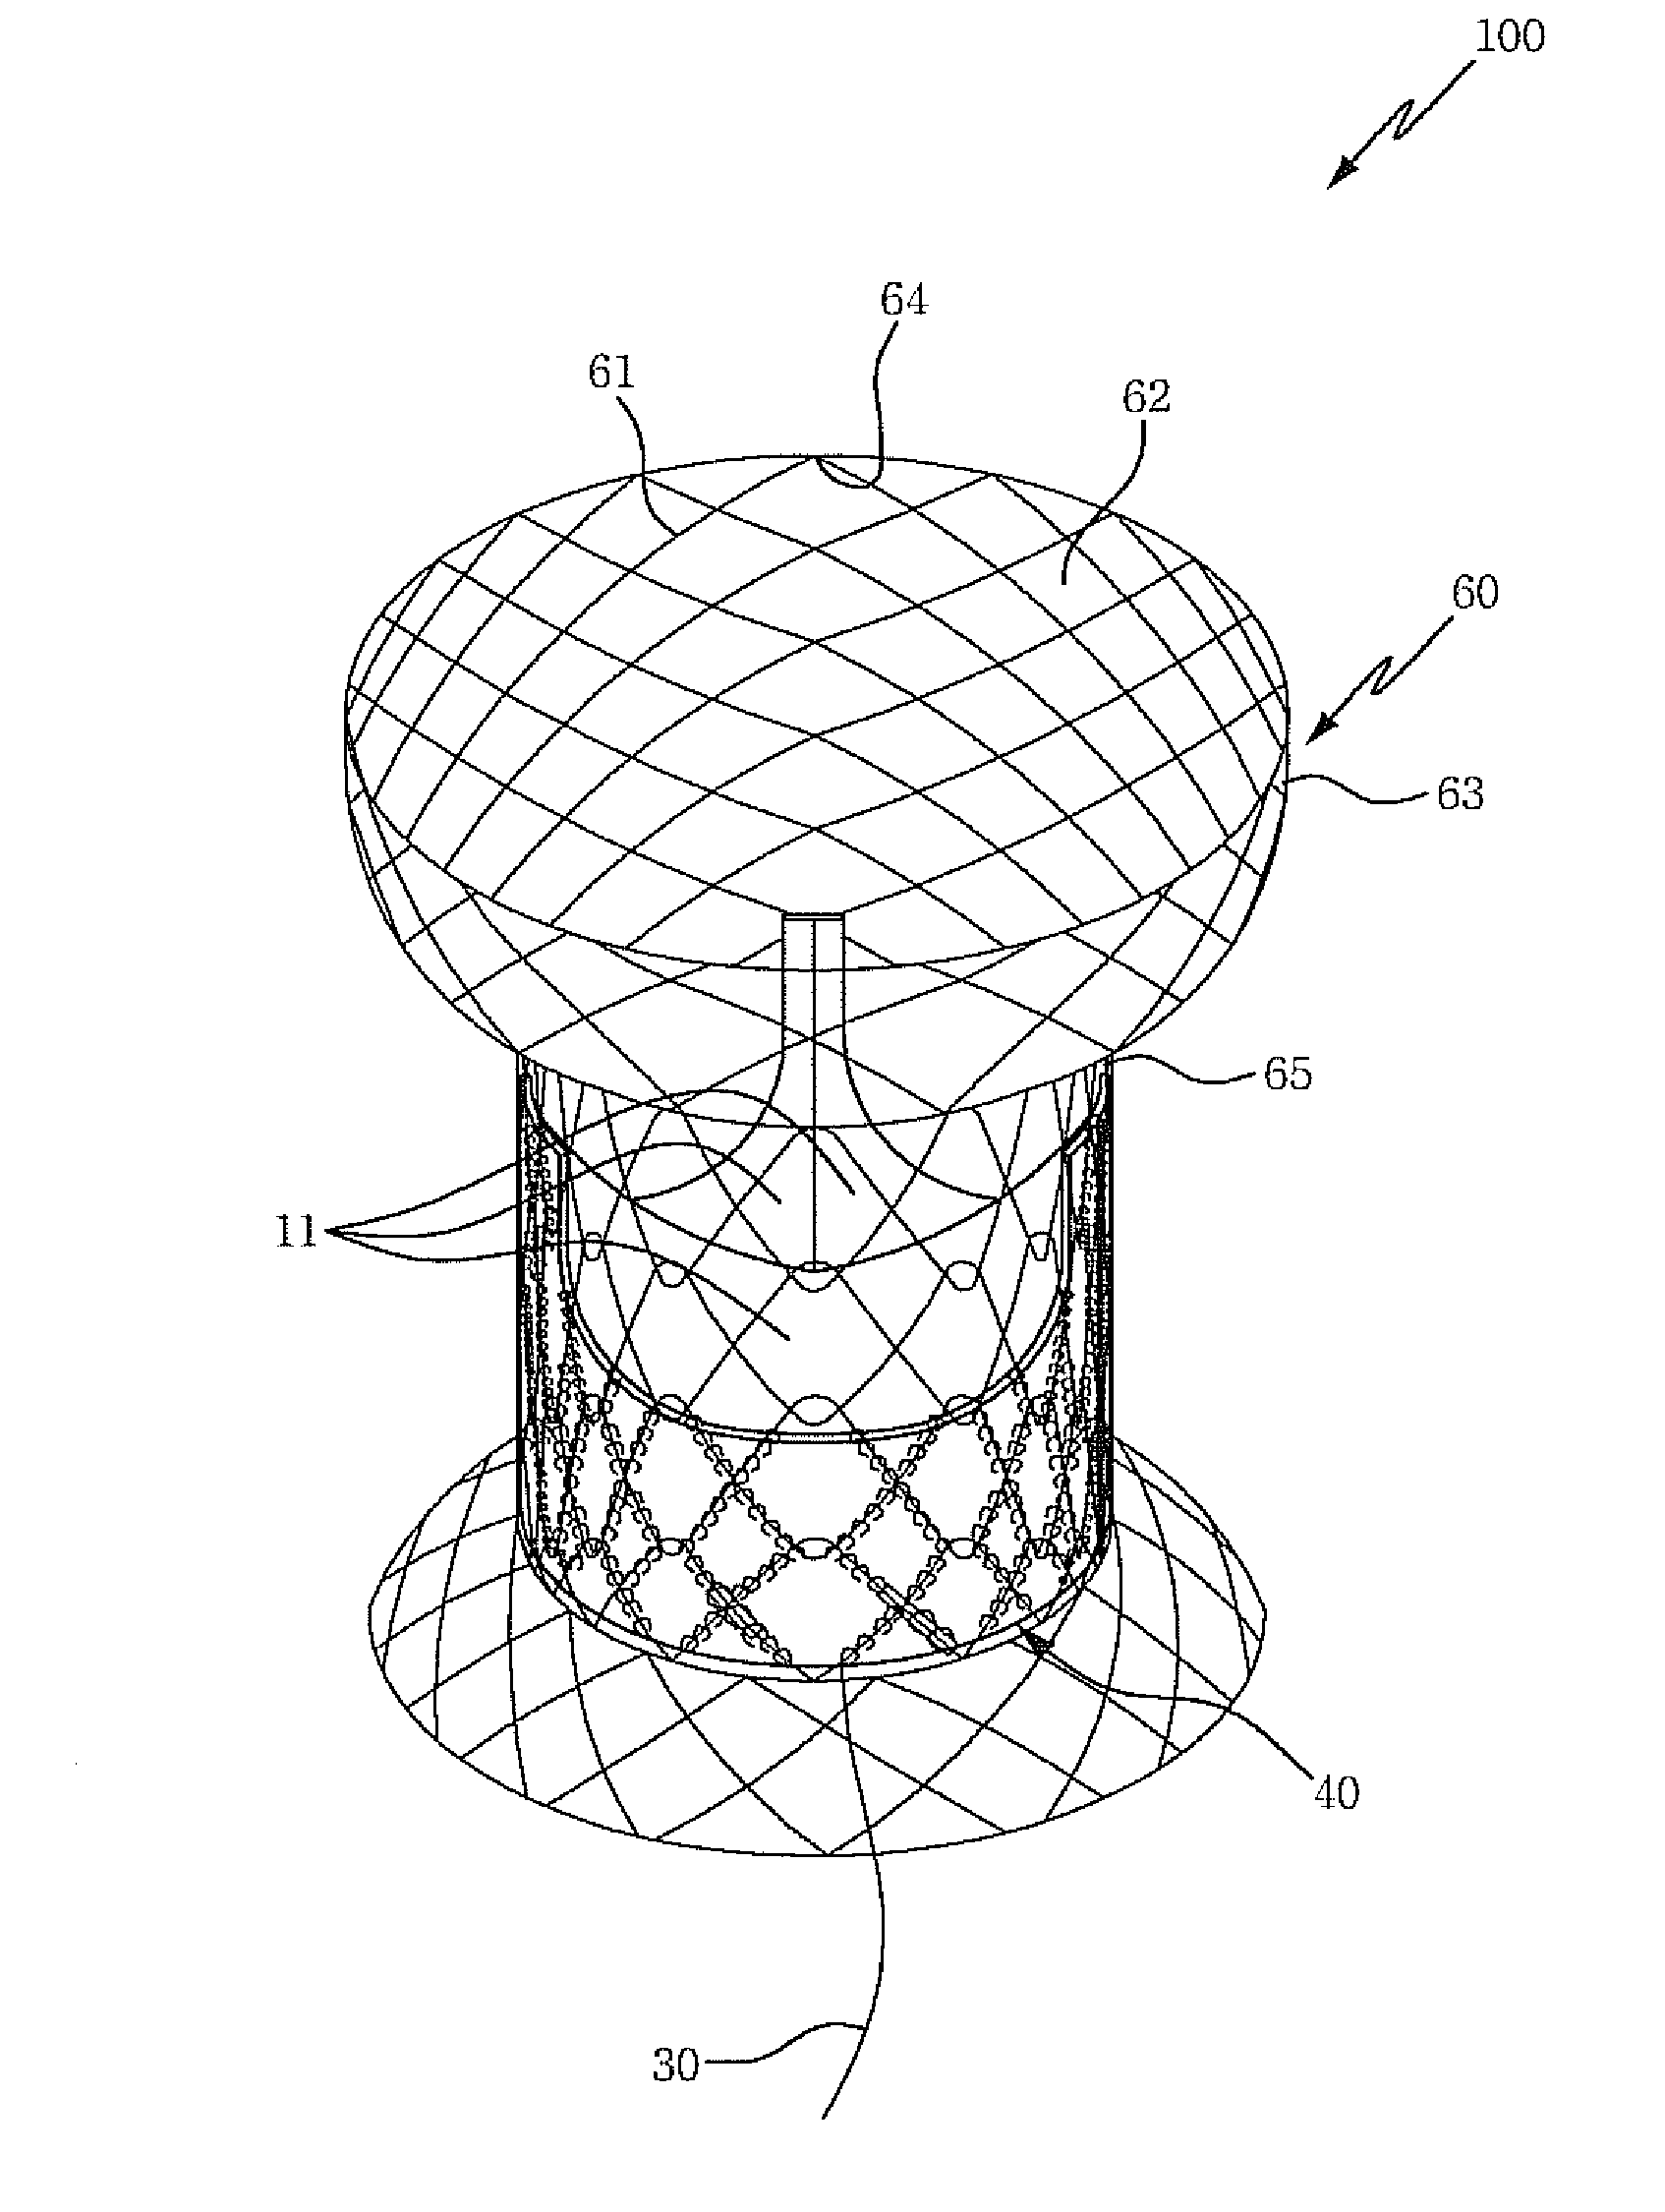 Heart valve prosthesis using different types of living tissue and method of fabricating the same